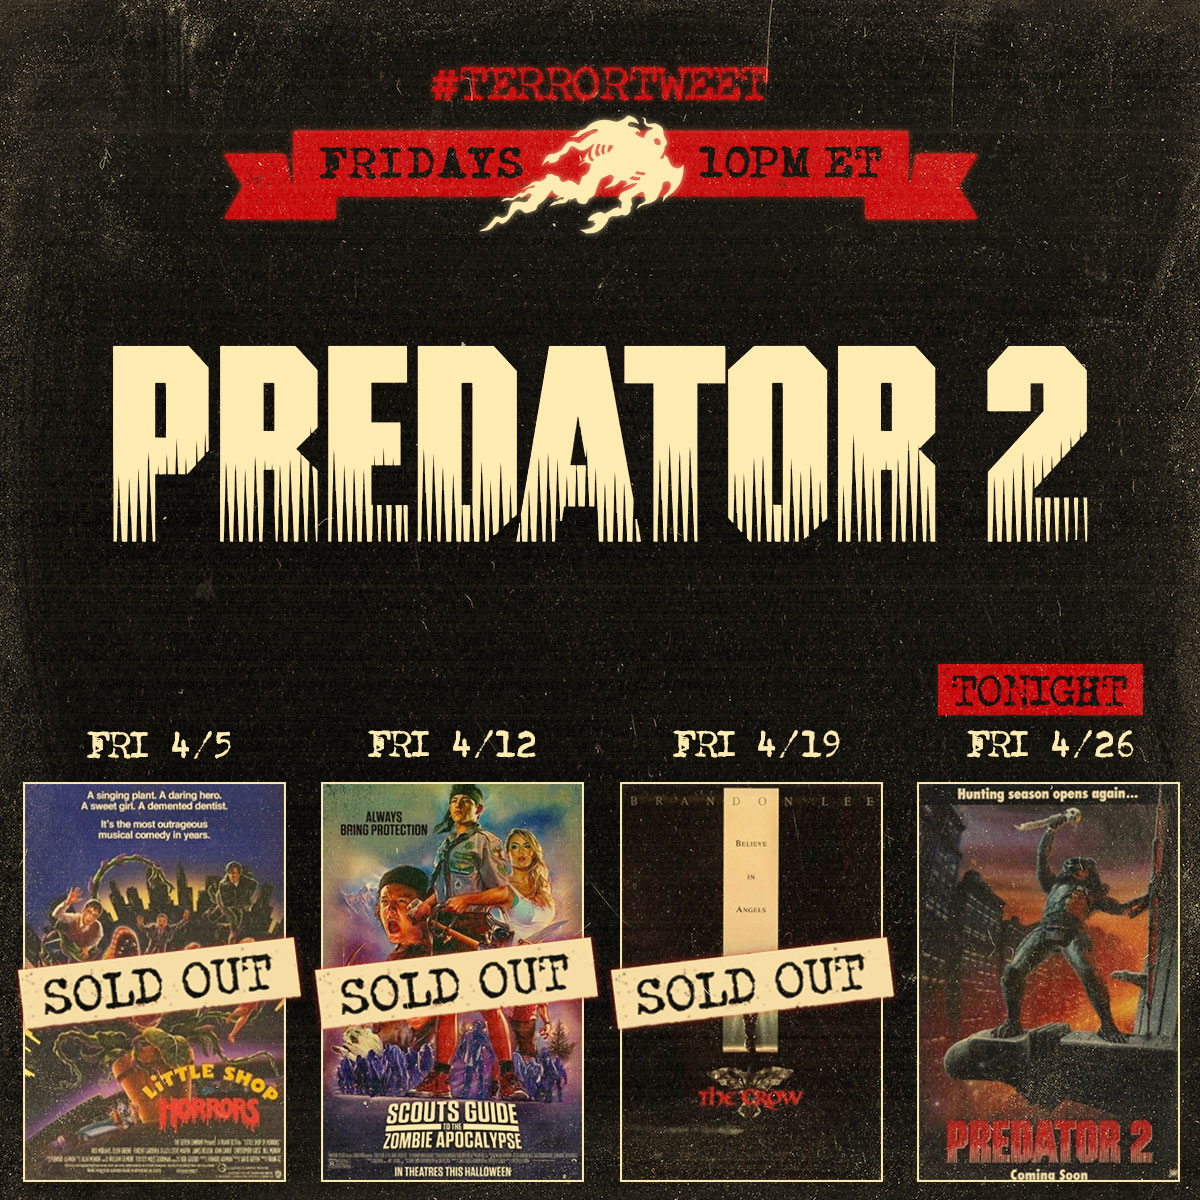 🚀💀 He's in town with a few days to kill. Tonight's #terrortweet is PREDATOR 2. Find your copy and watch it with us! Hit play at 10pm EDT TONIGHT (Friday 4/26) & join the conversation on DISCORD 👉 discord.com/invite/dV2MTwy…